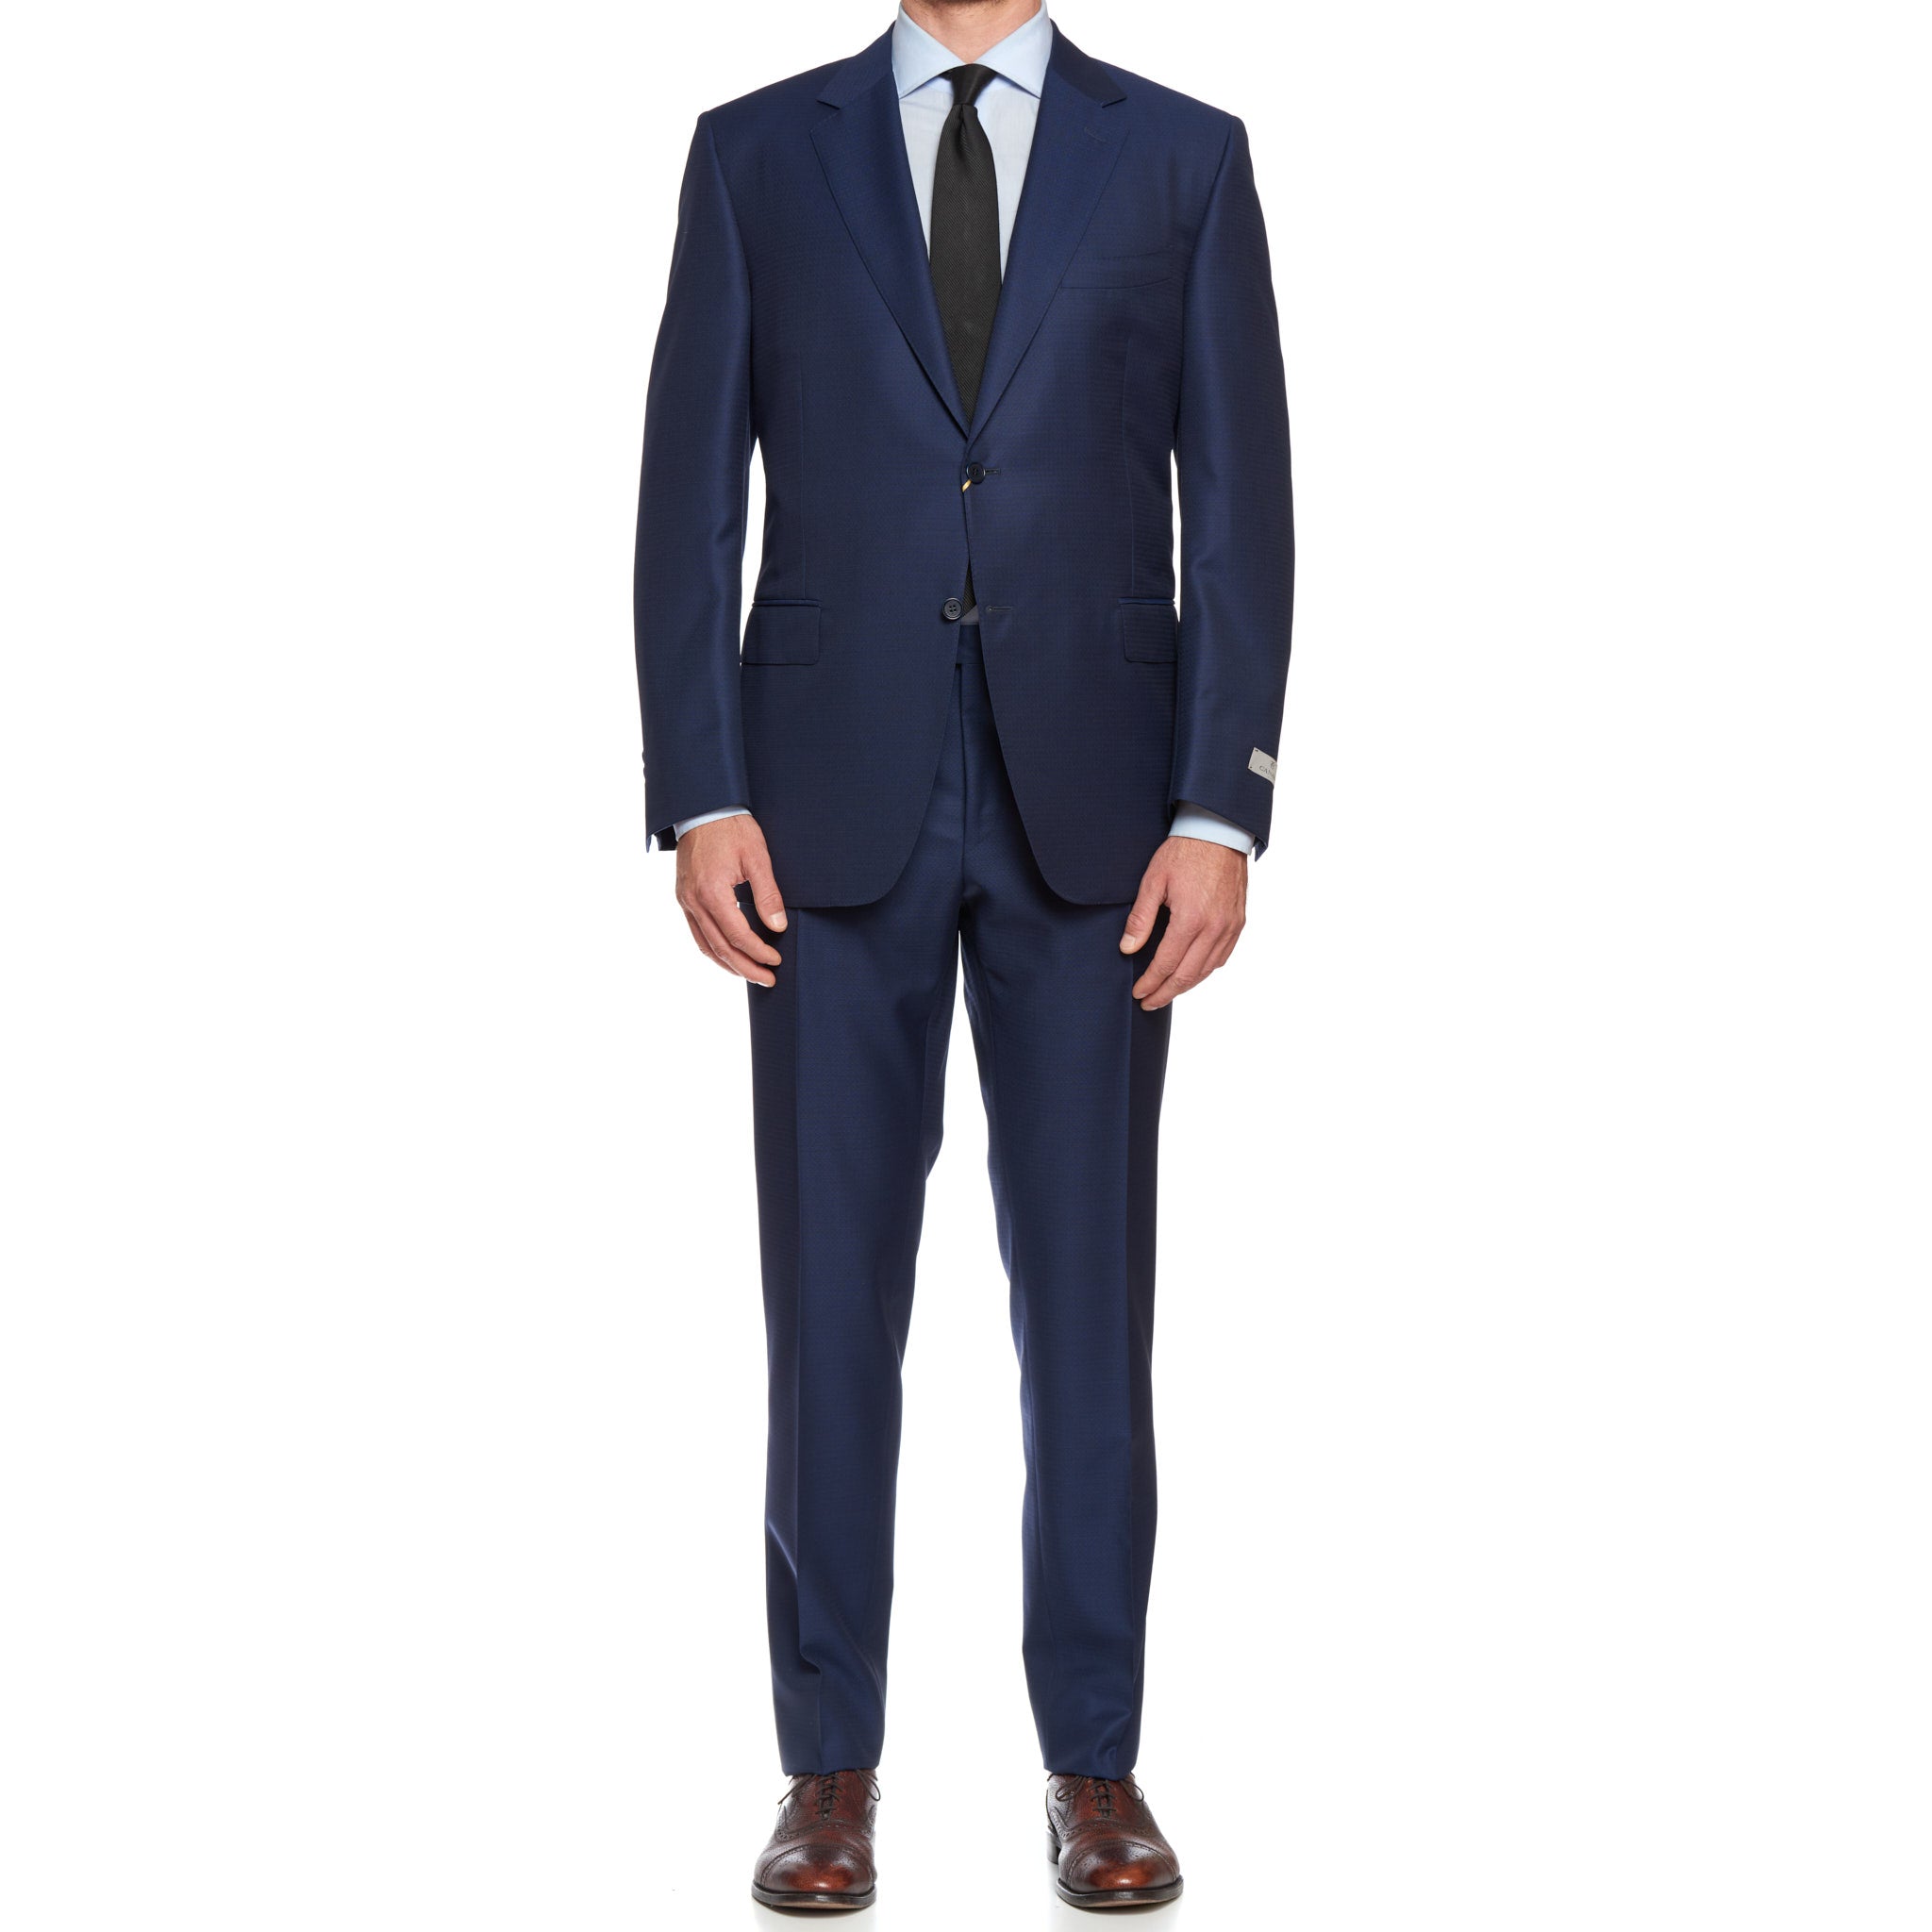 CANALI 1934 "Travel" Navy Blue Jacquard Wool-Mohair Suit EU 56 NEW US 46 Current Model